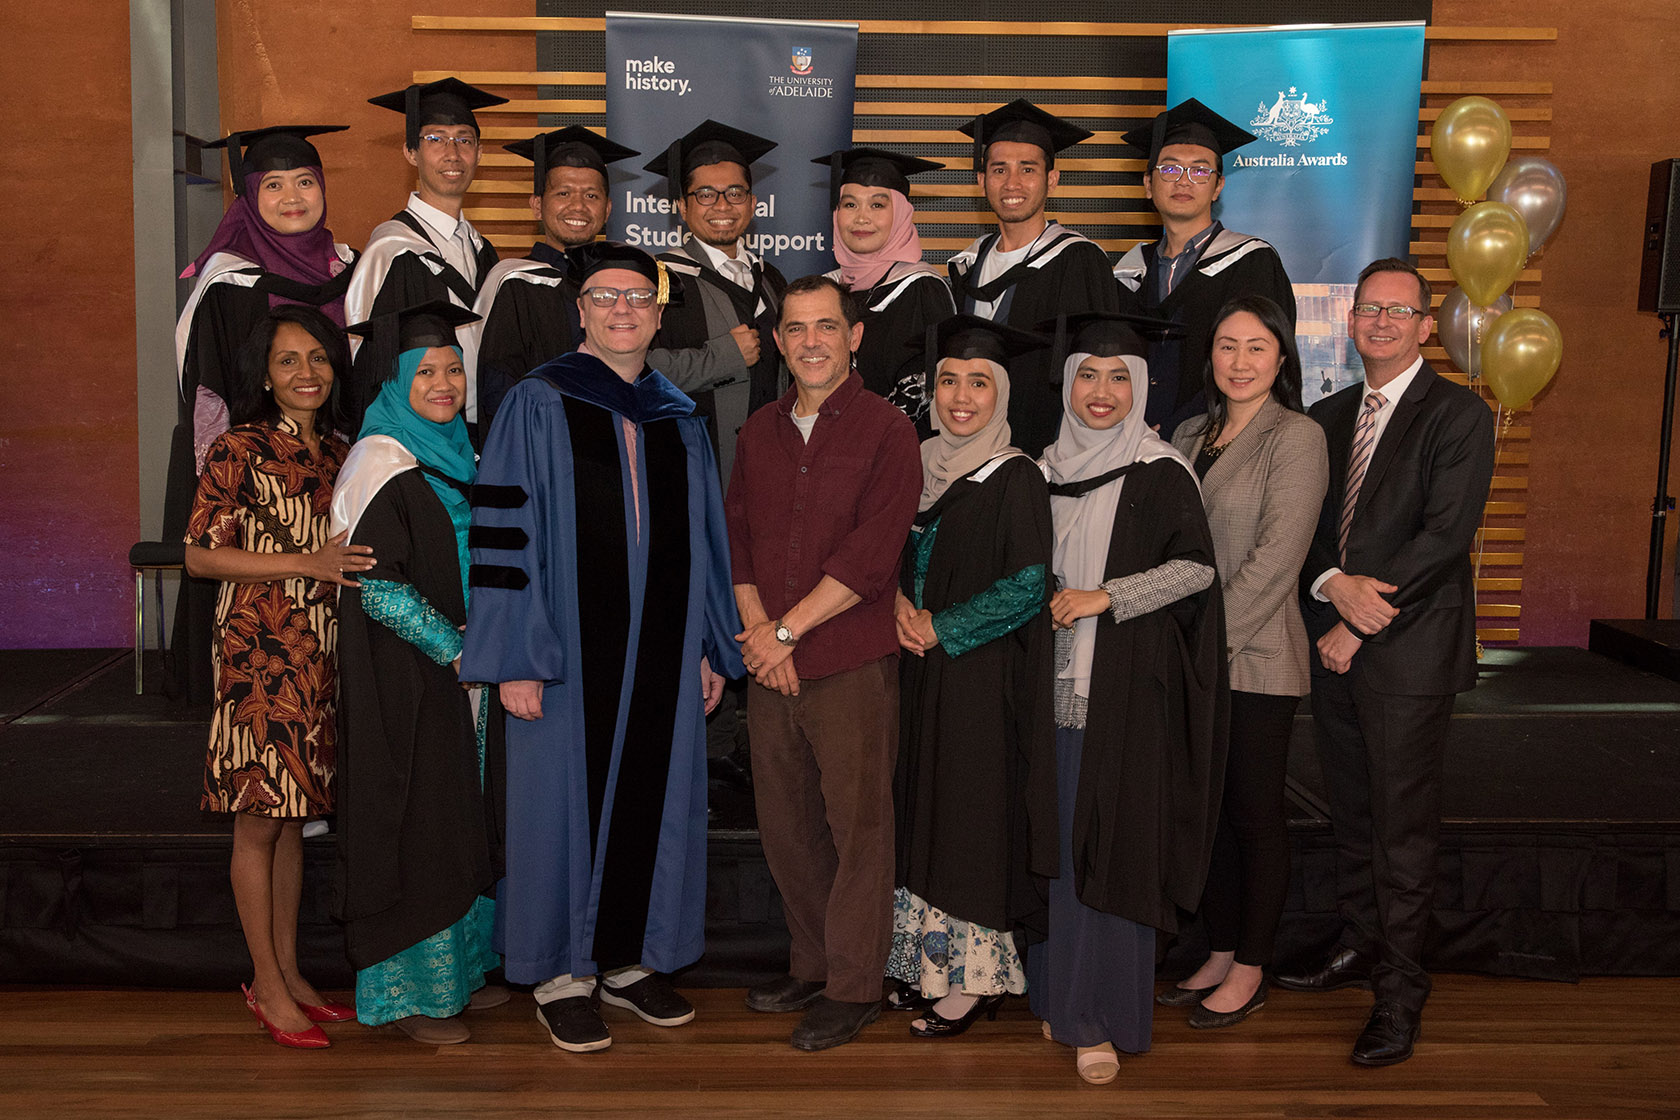 SSMP graduates take a picture wearing graduation gowns with representatives of the University of Adelaide